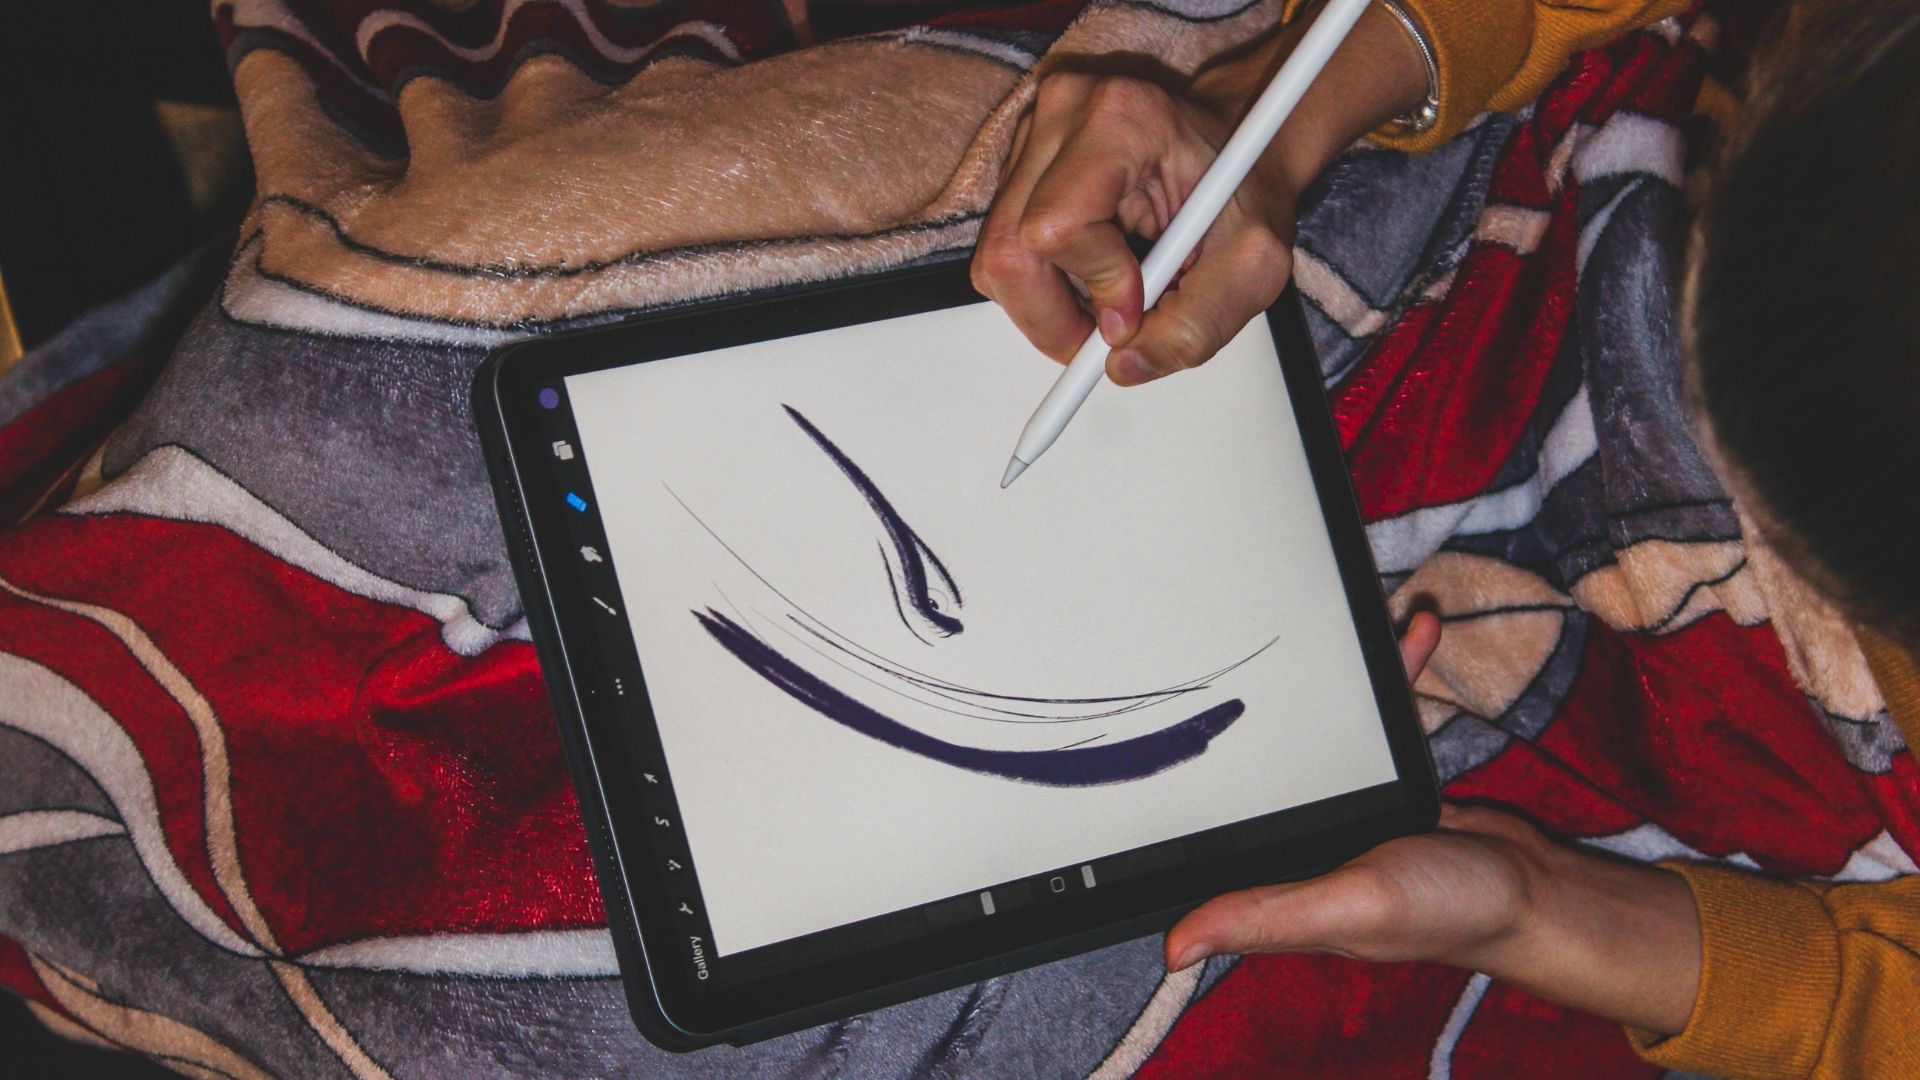 A marketer sitting down to work on digital branding on an ipad with pen